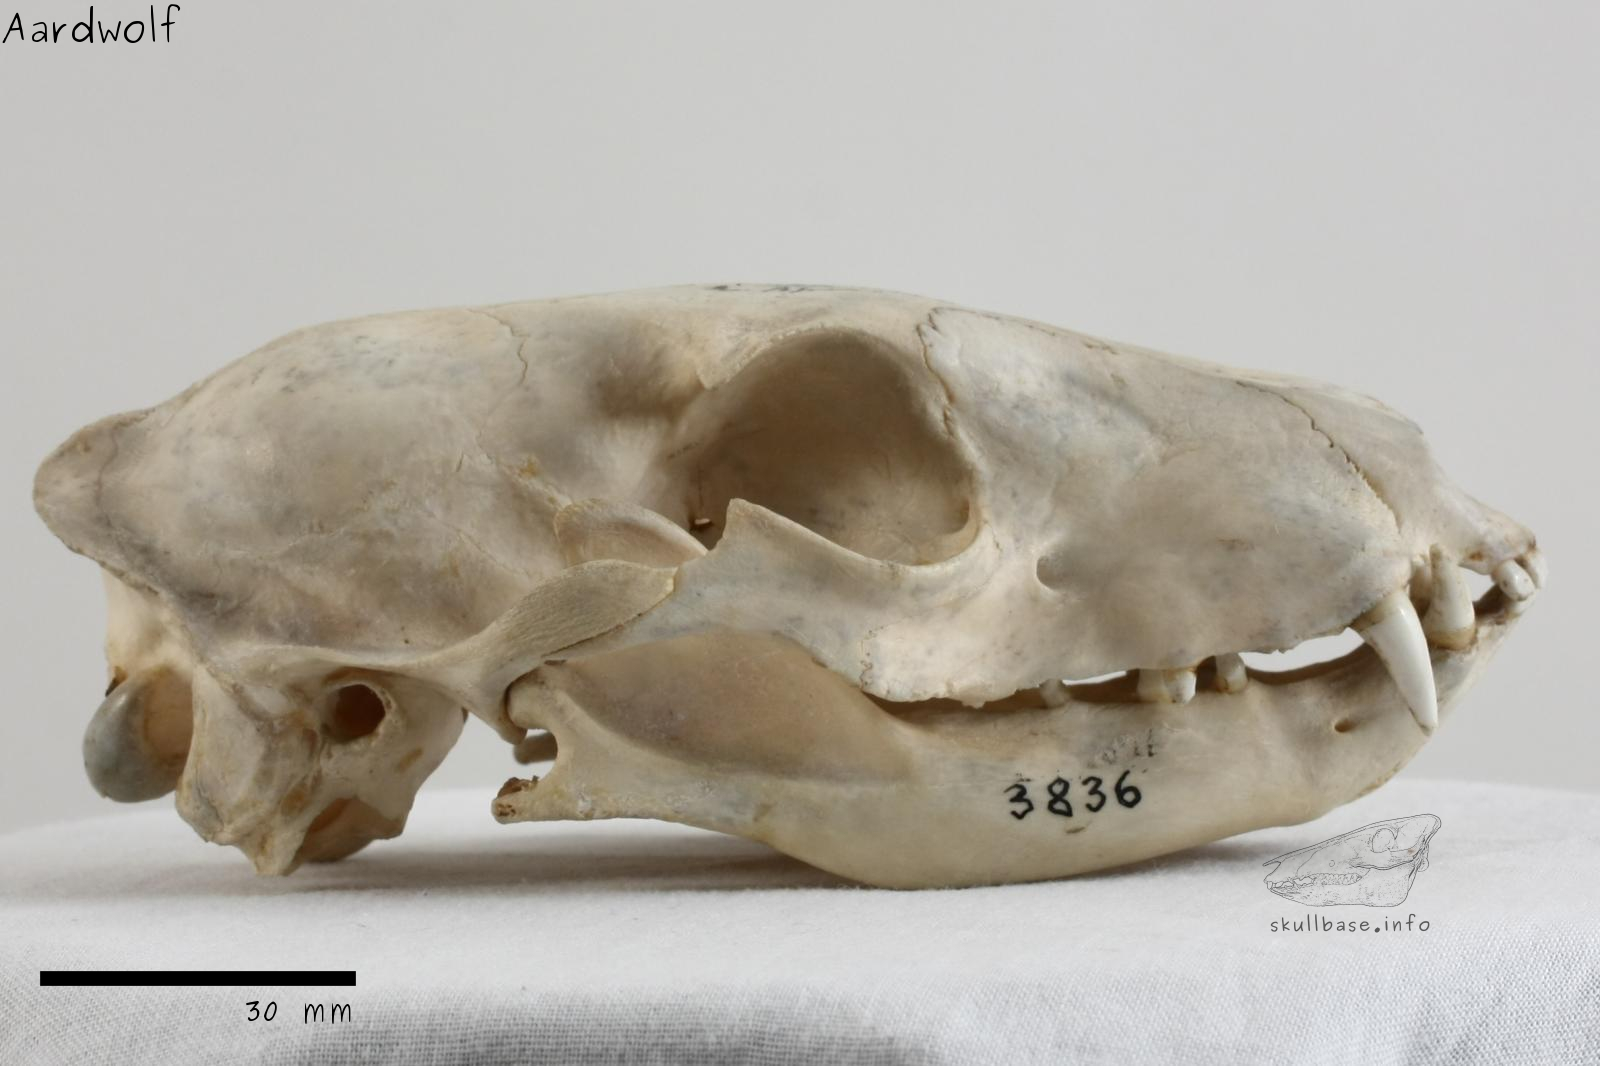 Aardwolf (Proteles cristata) skull lateral view